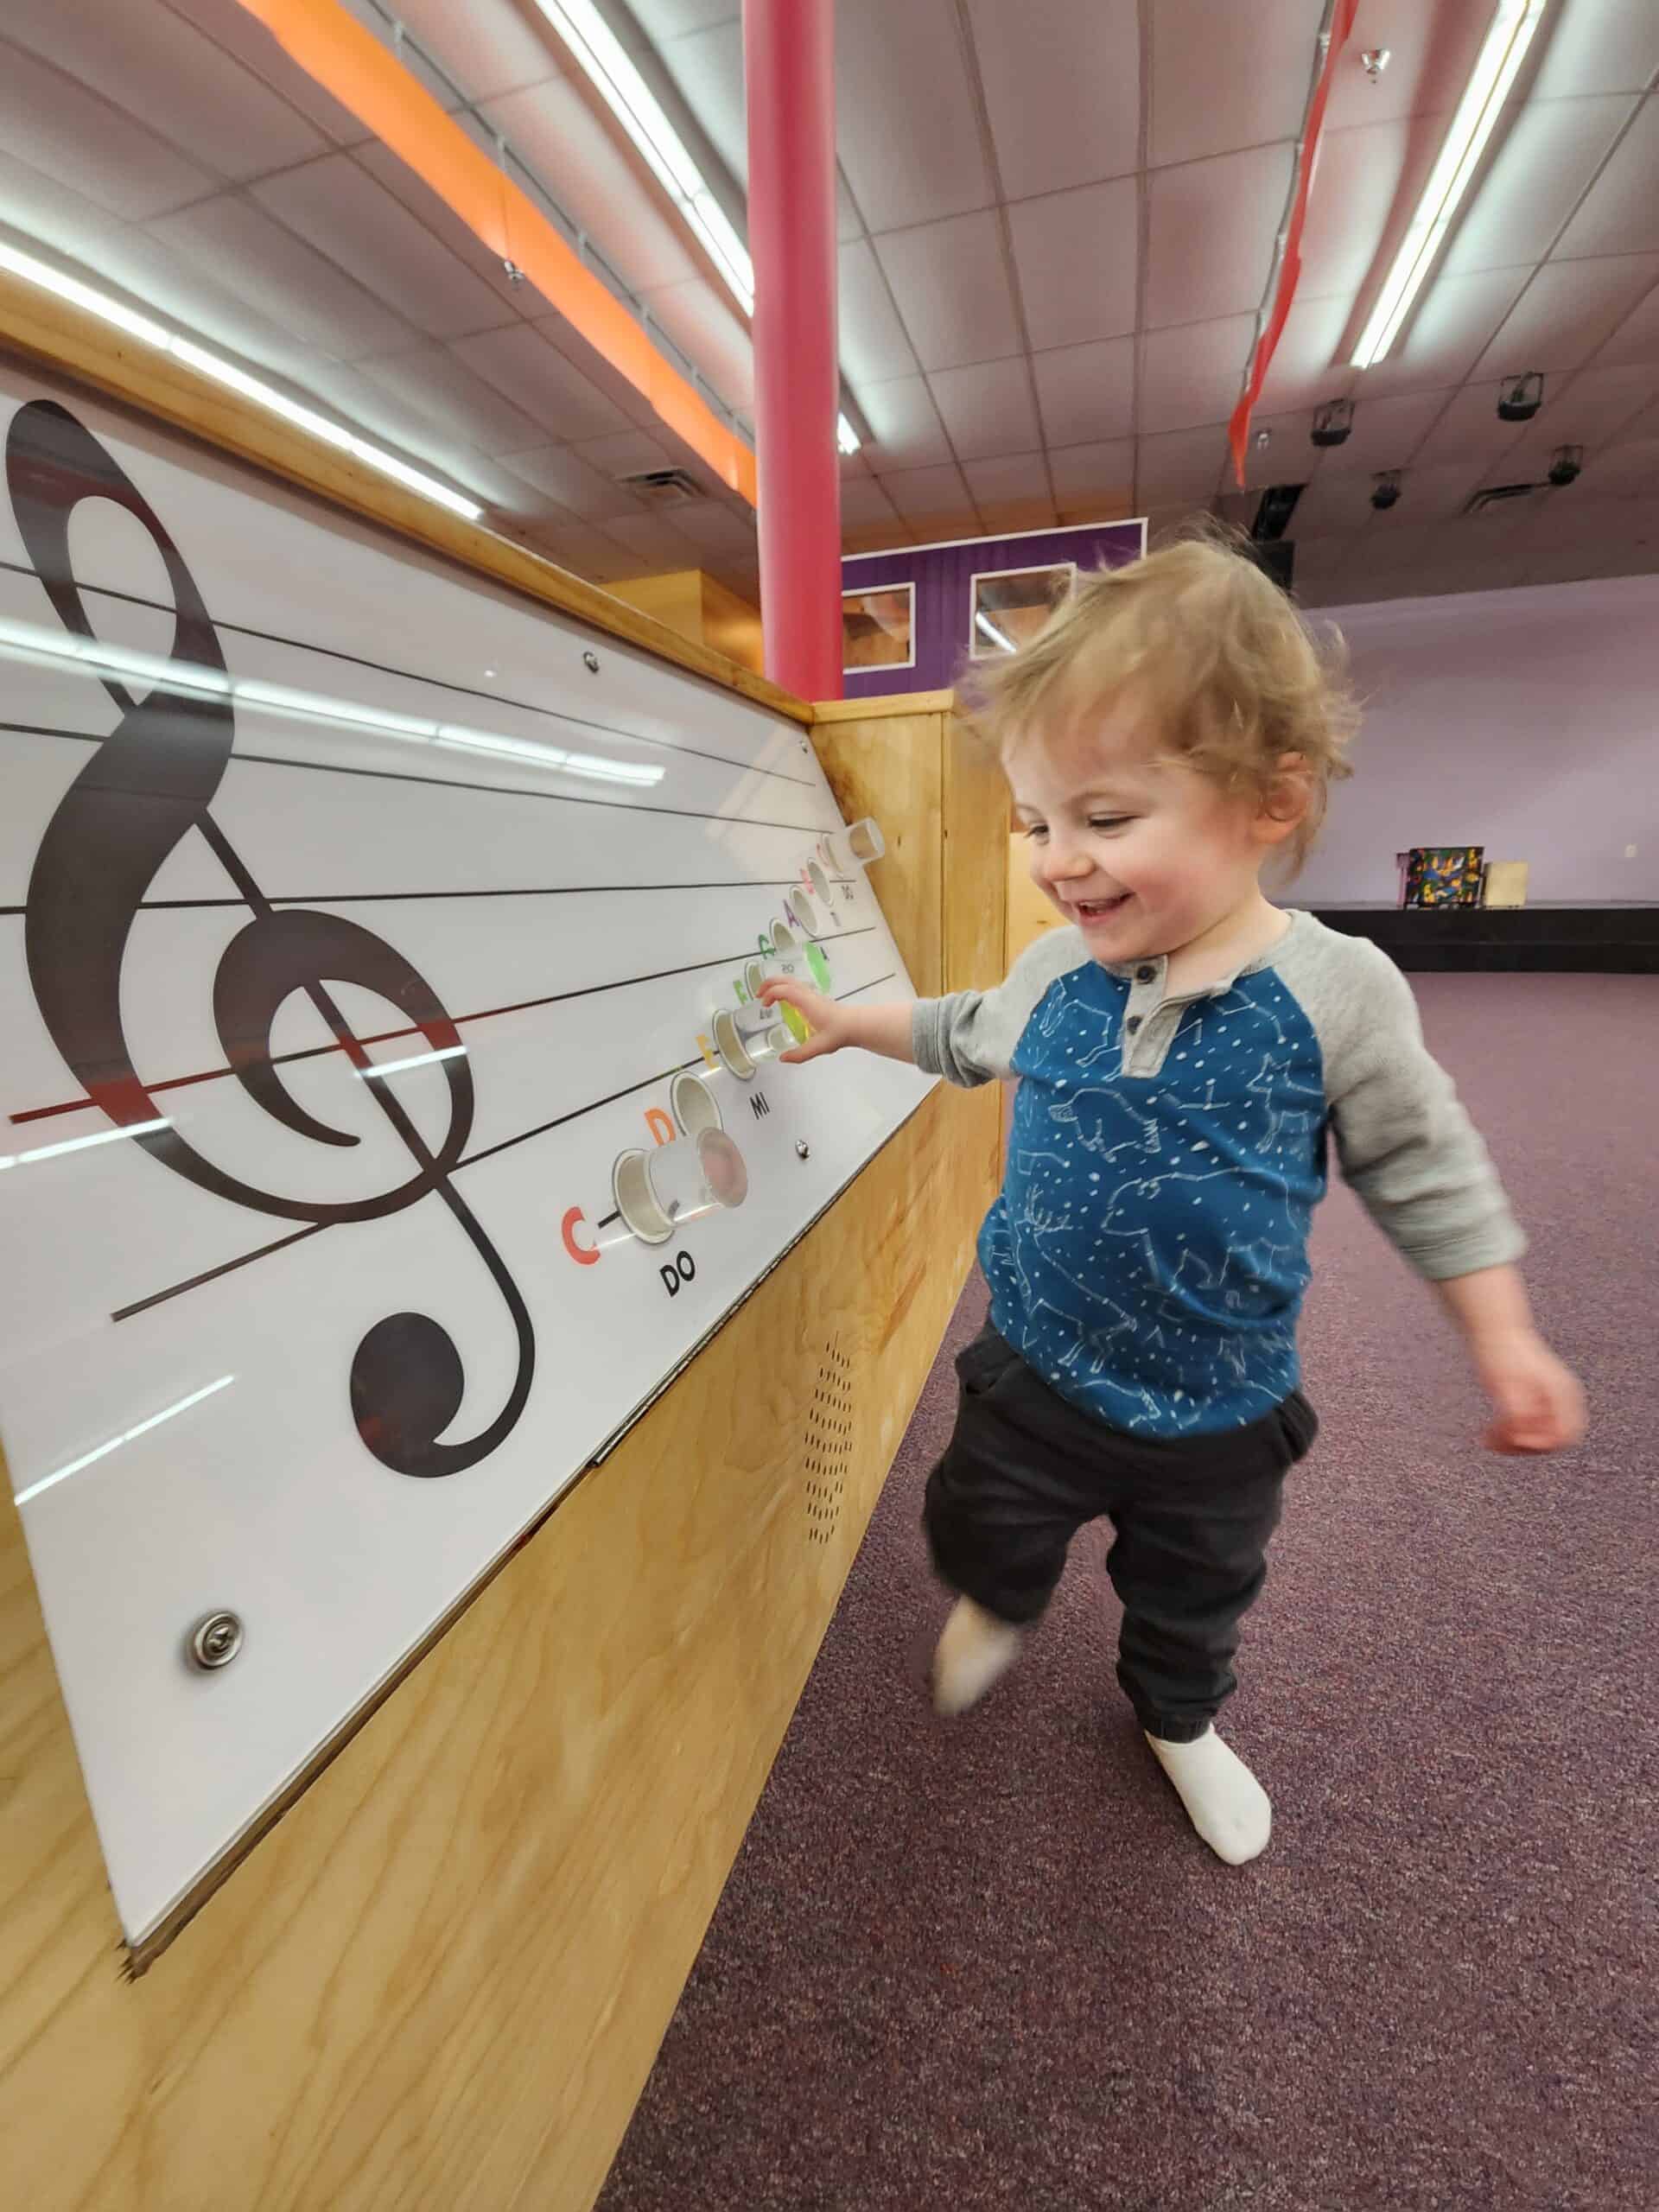 A toddler is captured in a moment of delight while playing with a colorful musical wall, learning about music notes in a fun and interactive indoor activity.